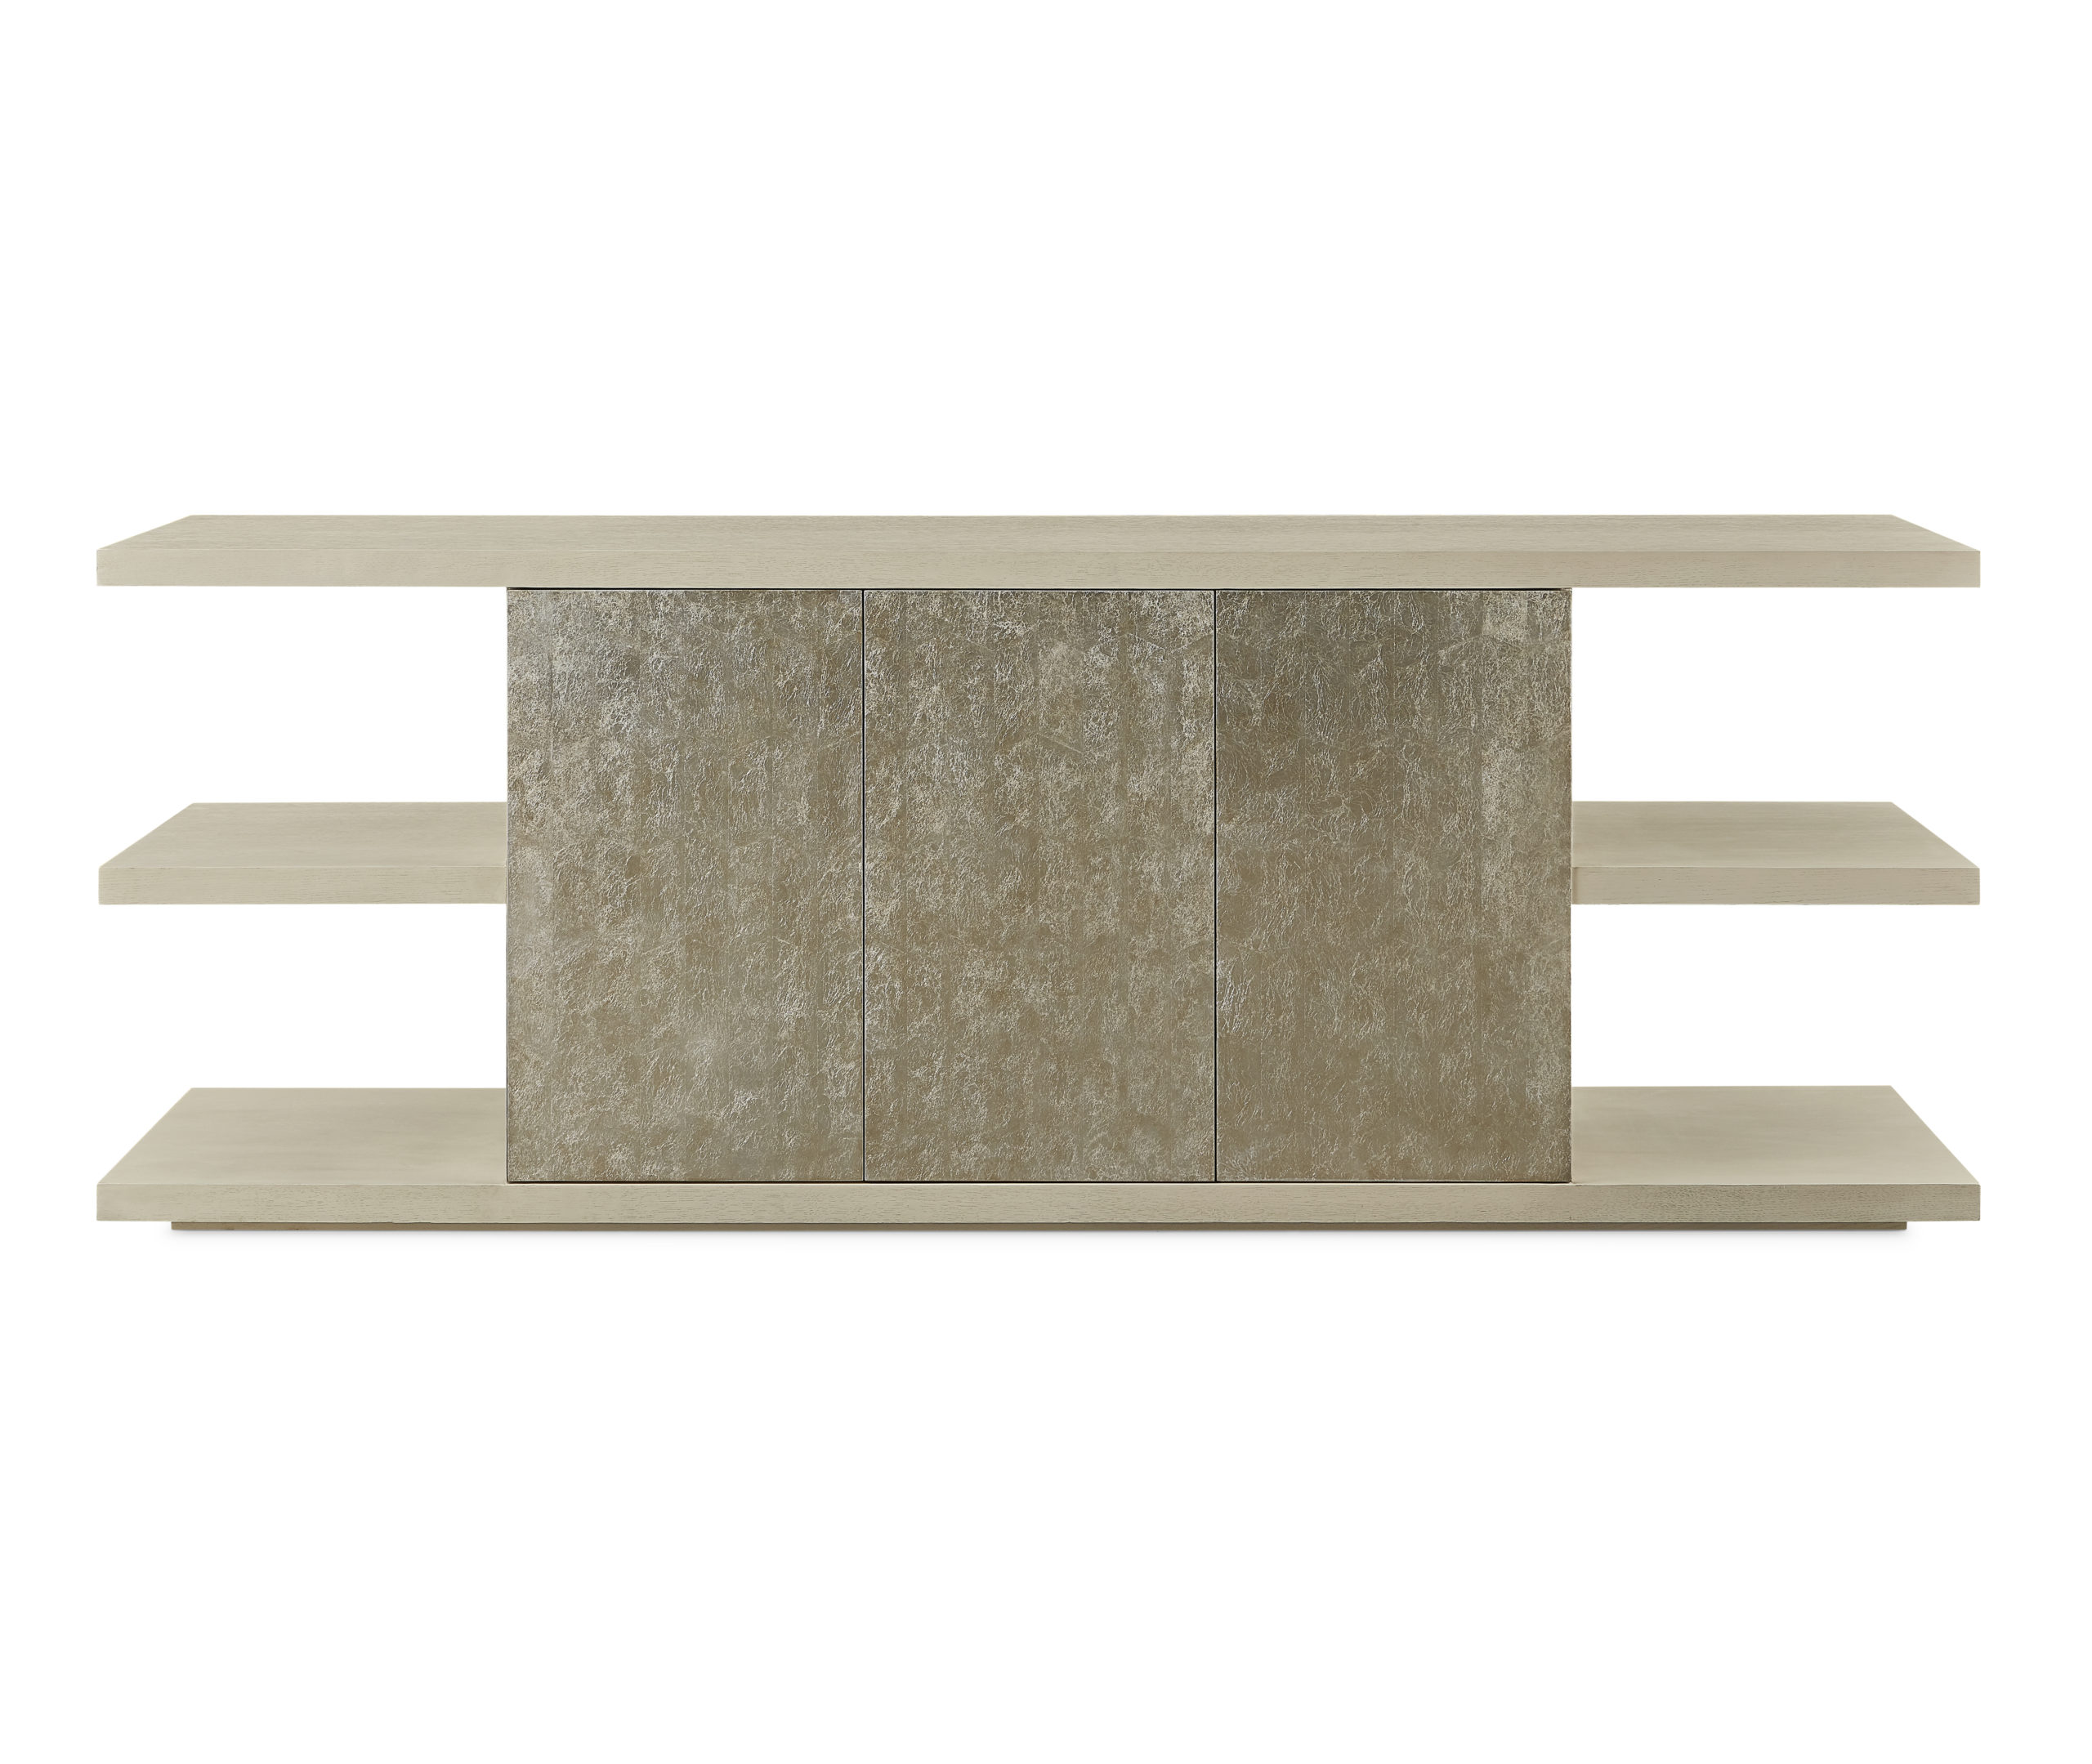 Baker_products_WNWN_hollis_media_console_BAA3064_FRONT-scaled-2